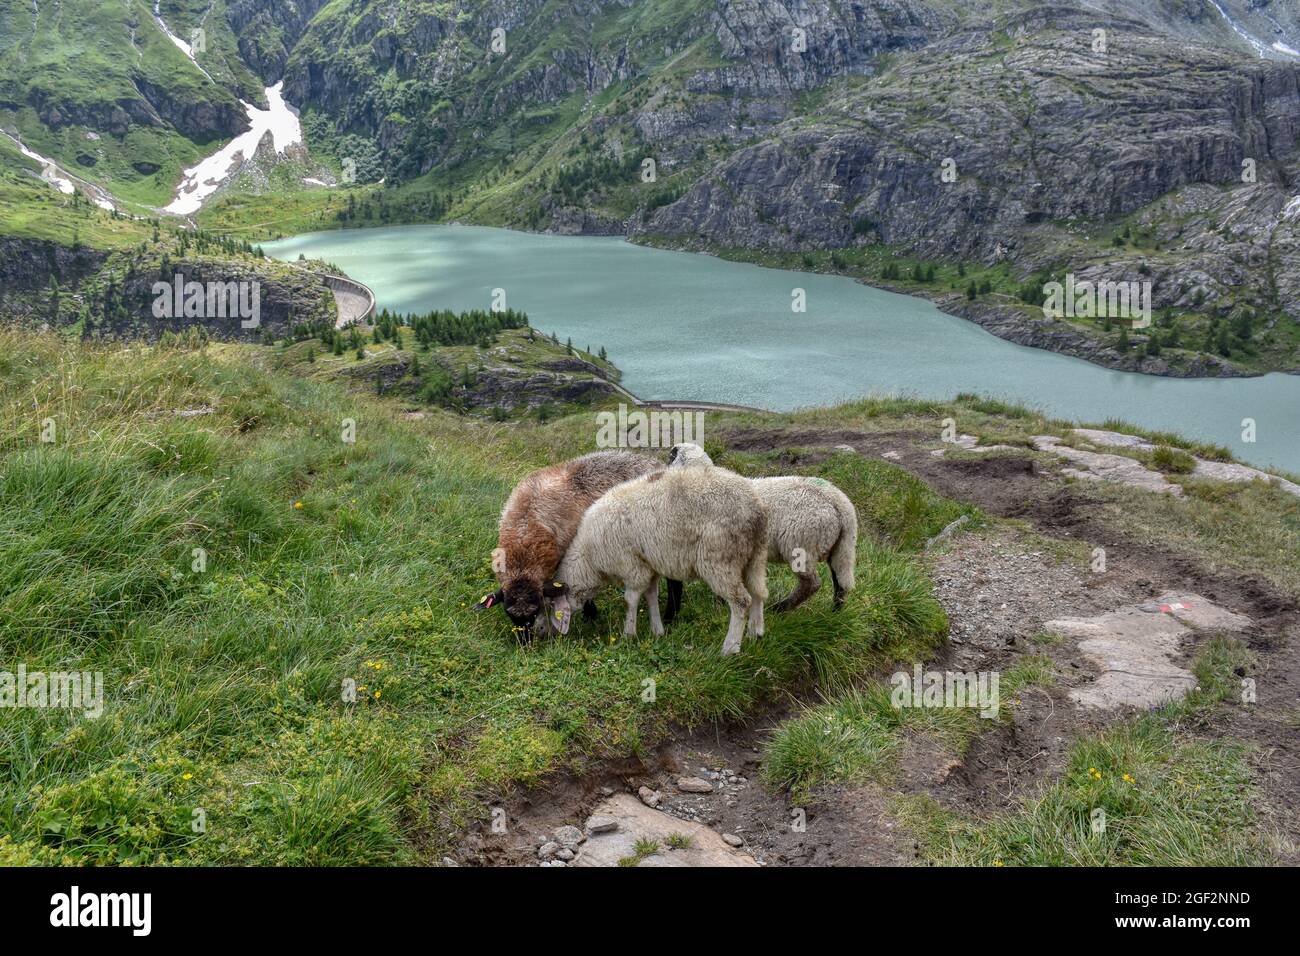 Wolle High Resolution Stock Photography and Images - Alamy